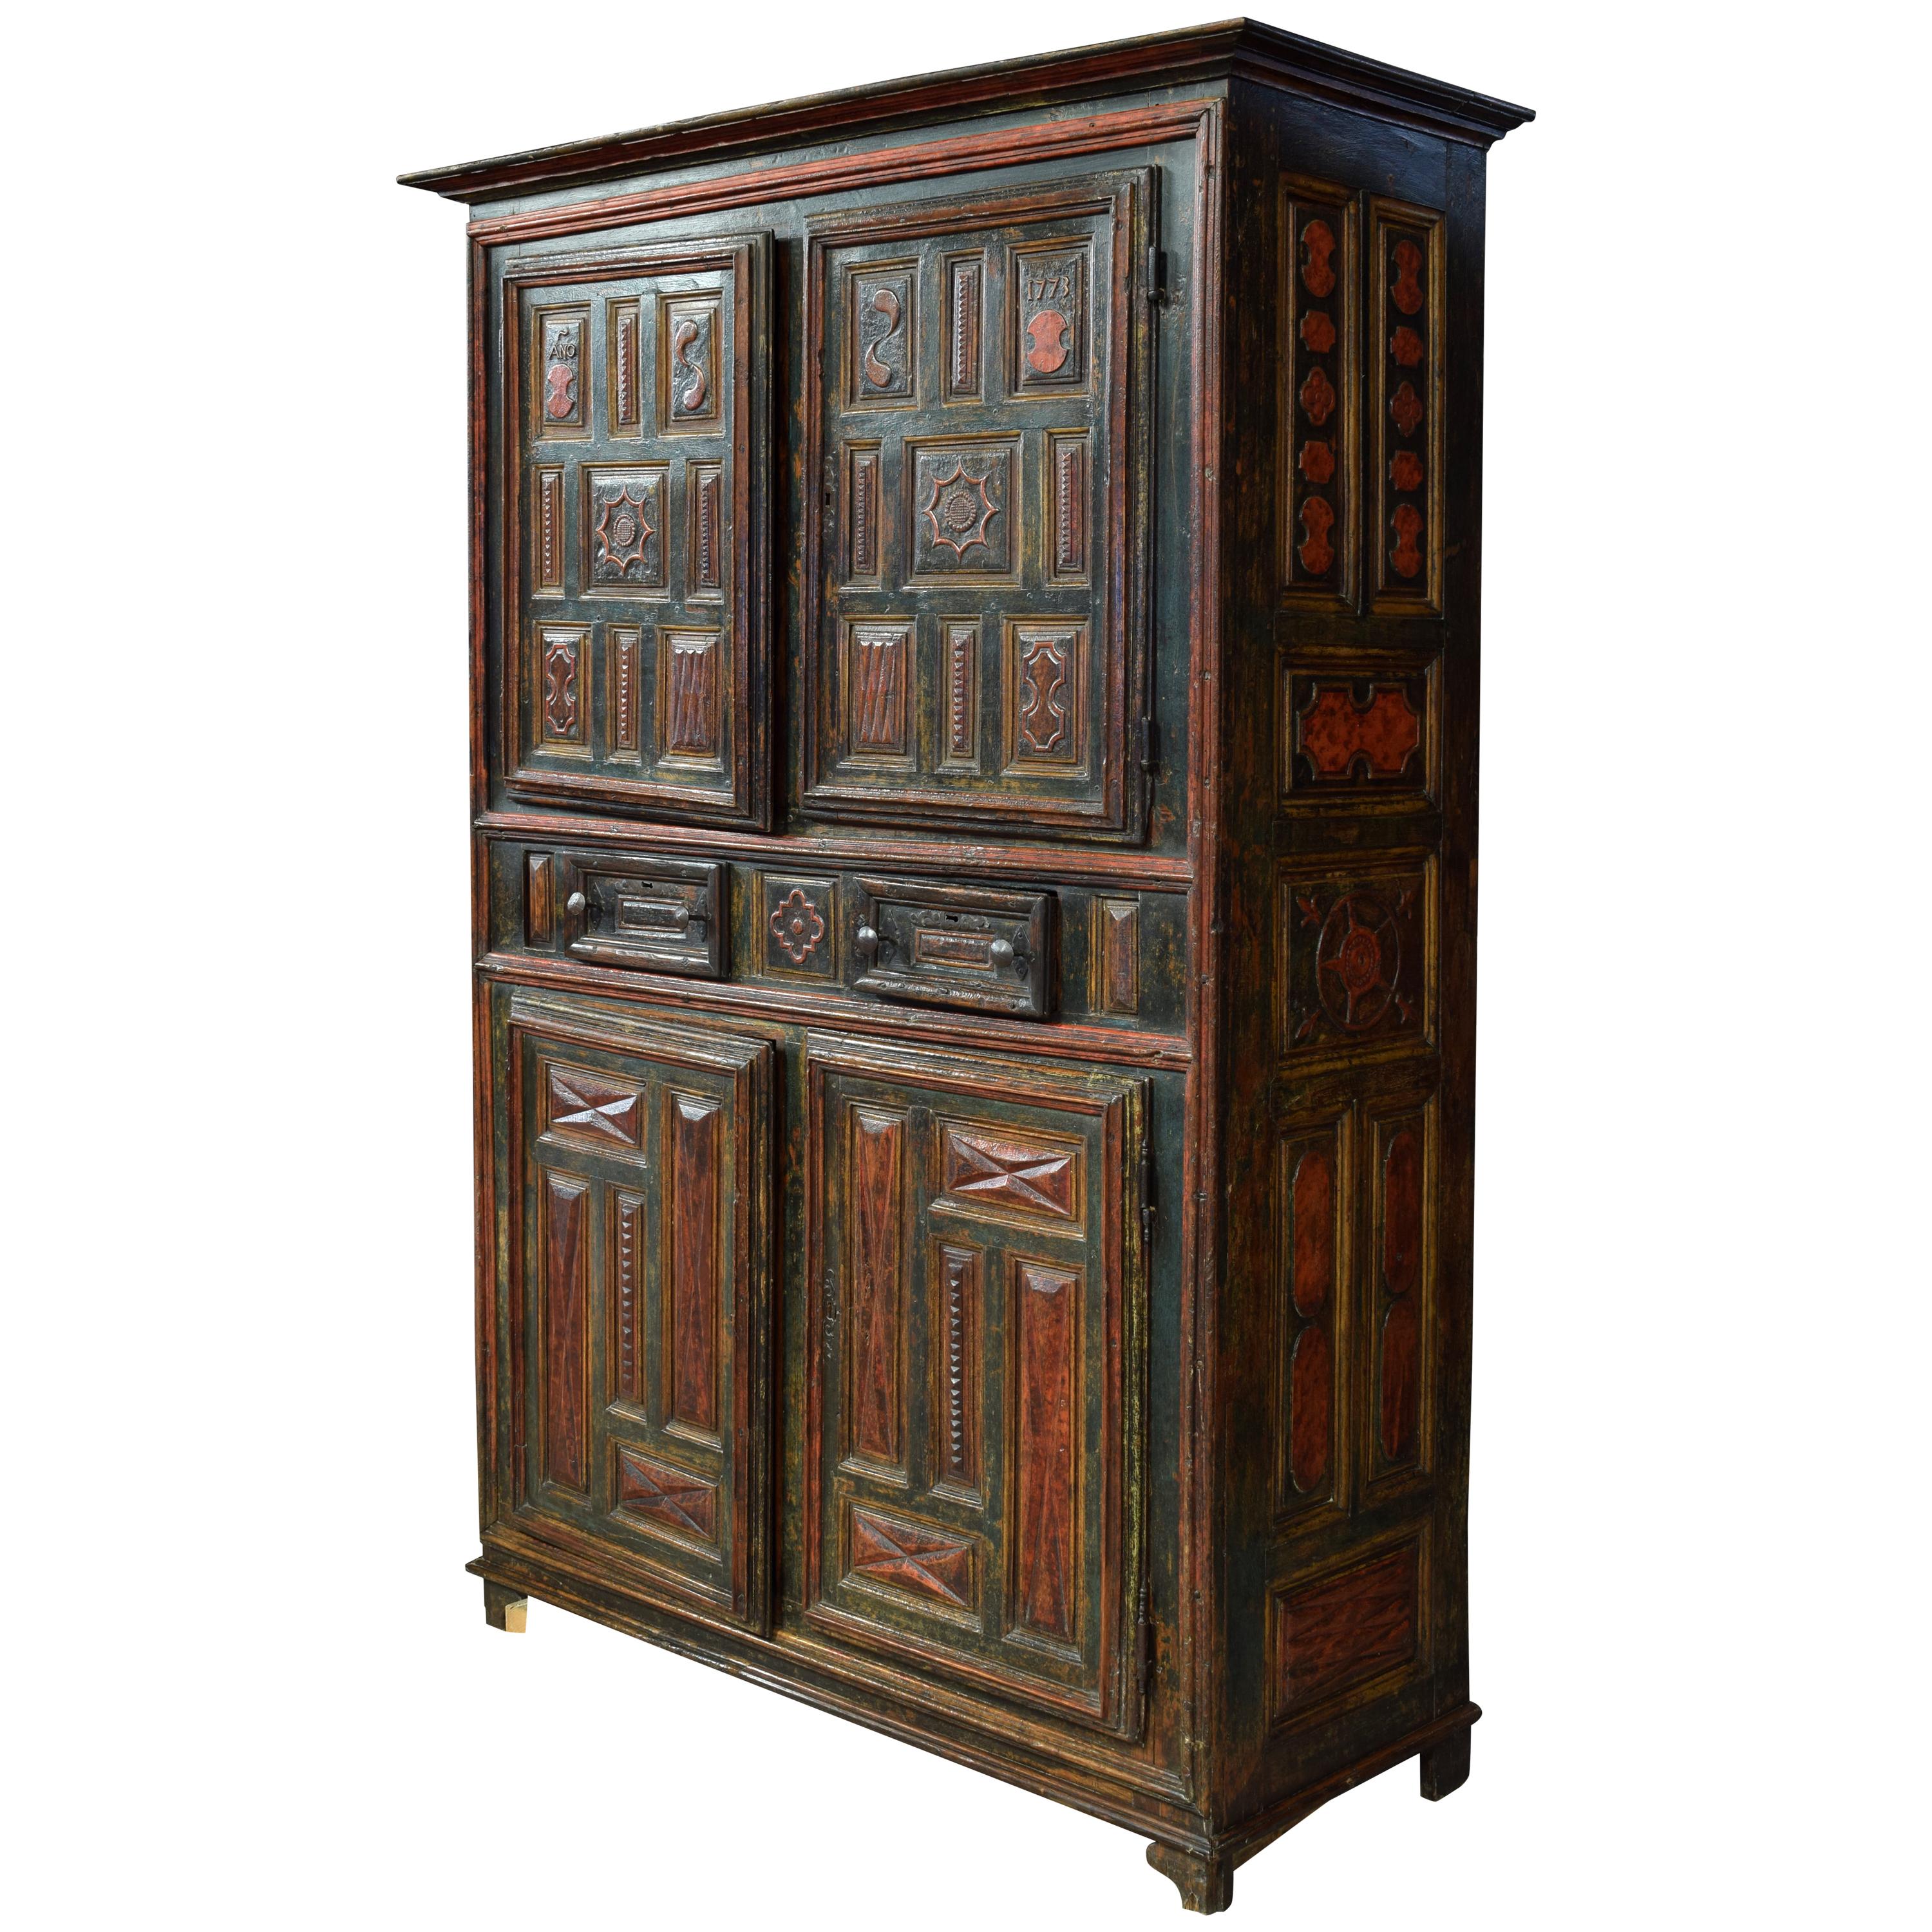 Polychromed Wood and Iron Cupboard. Spain, 1773. Dated